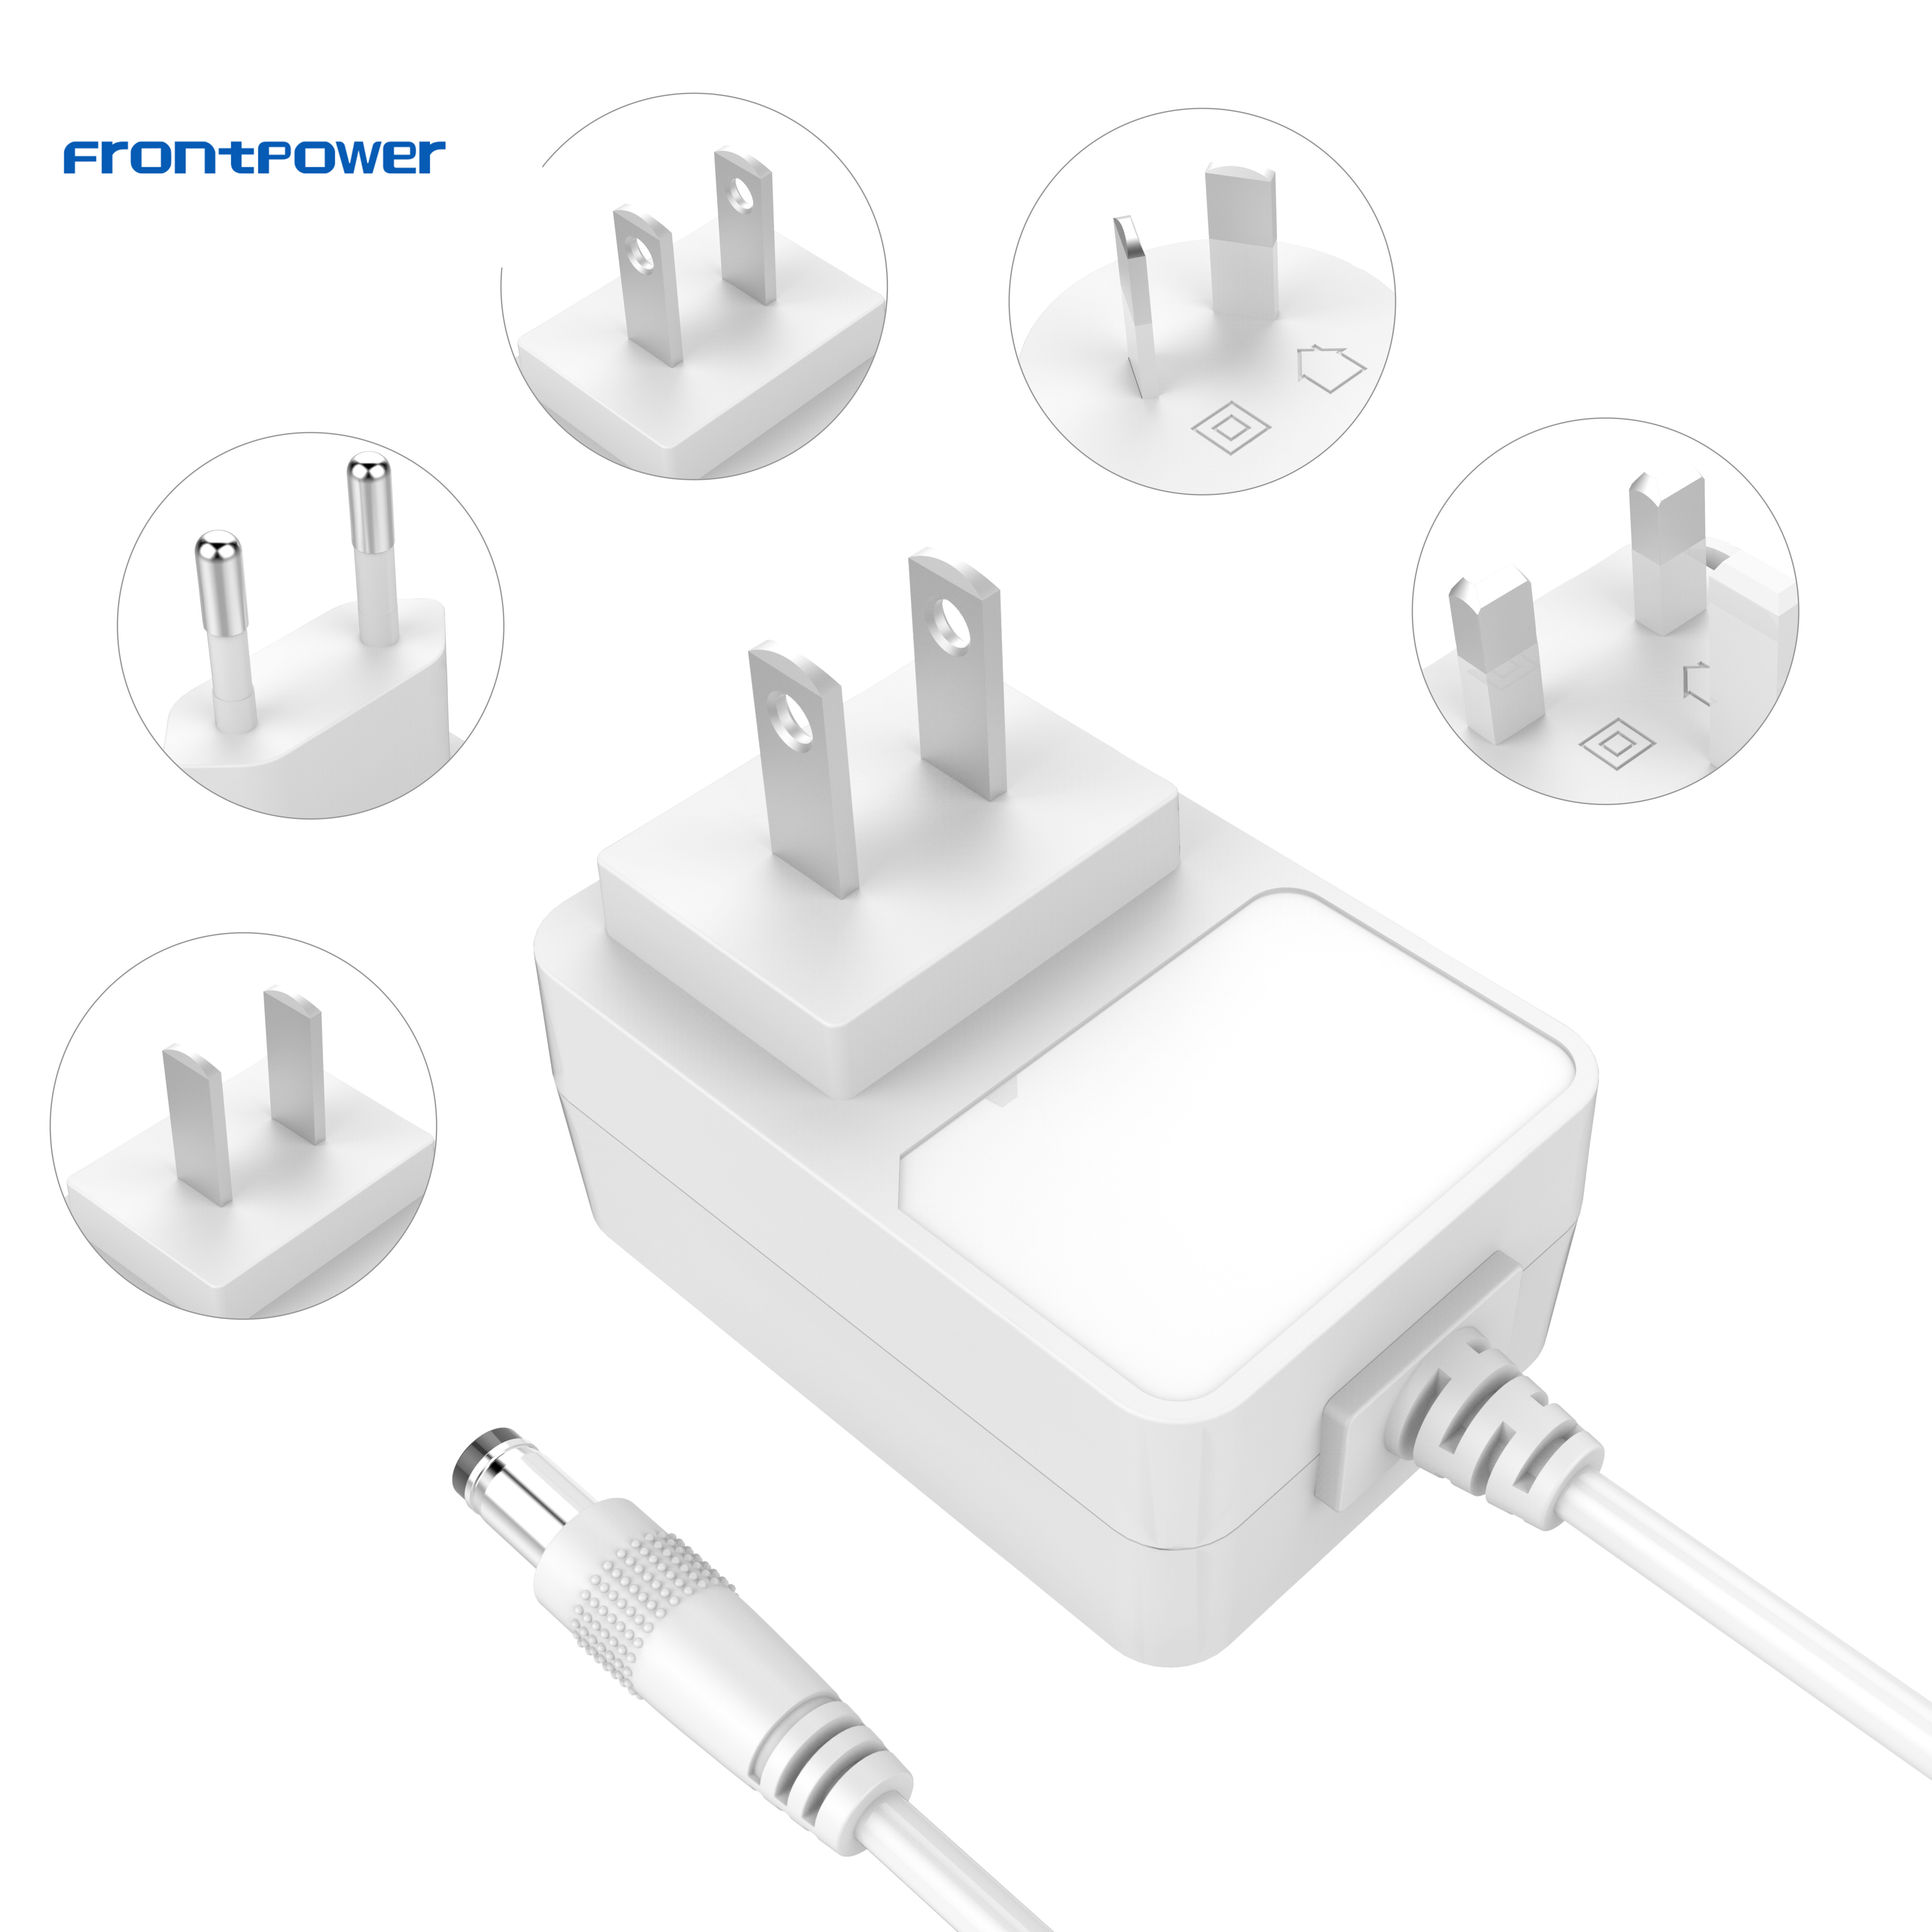 12W 5V 3A wall mount power adapter with BIS certification